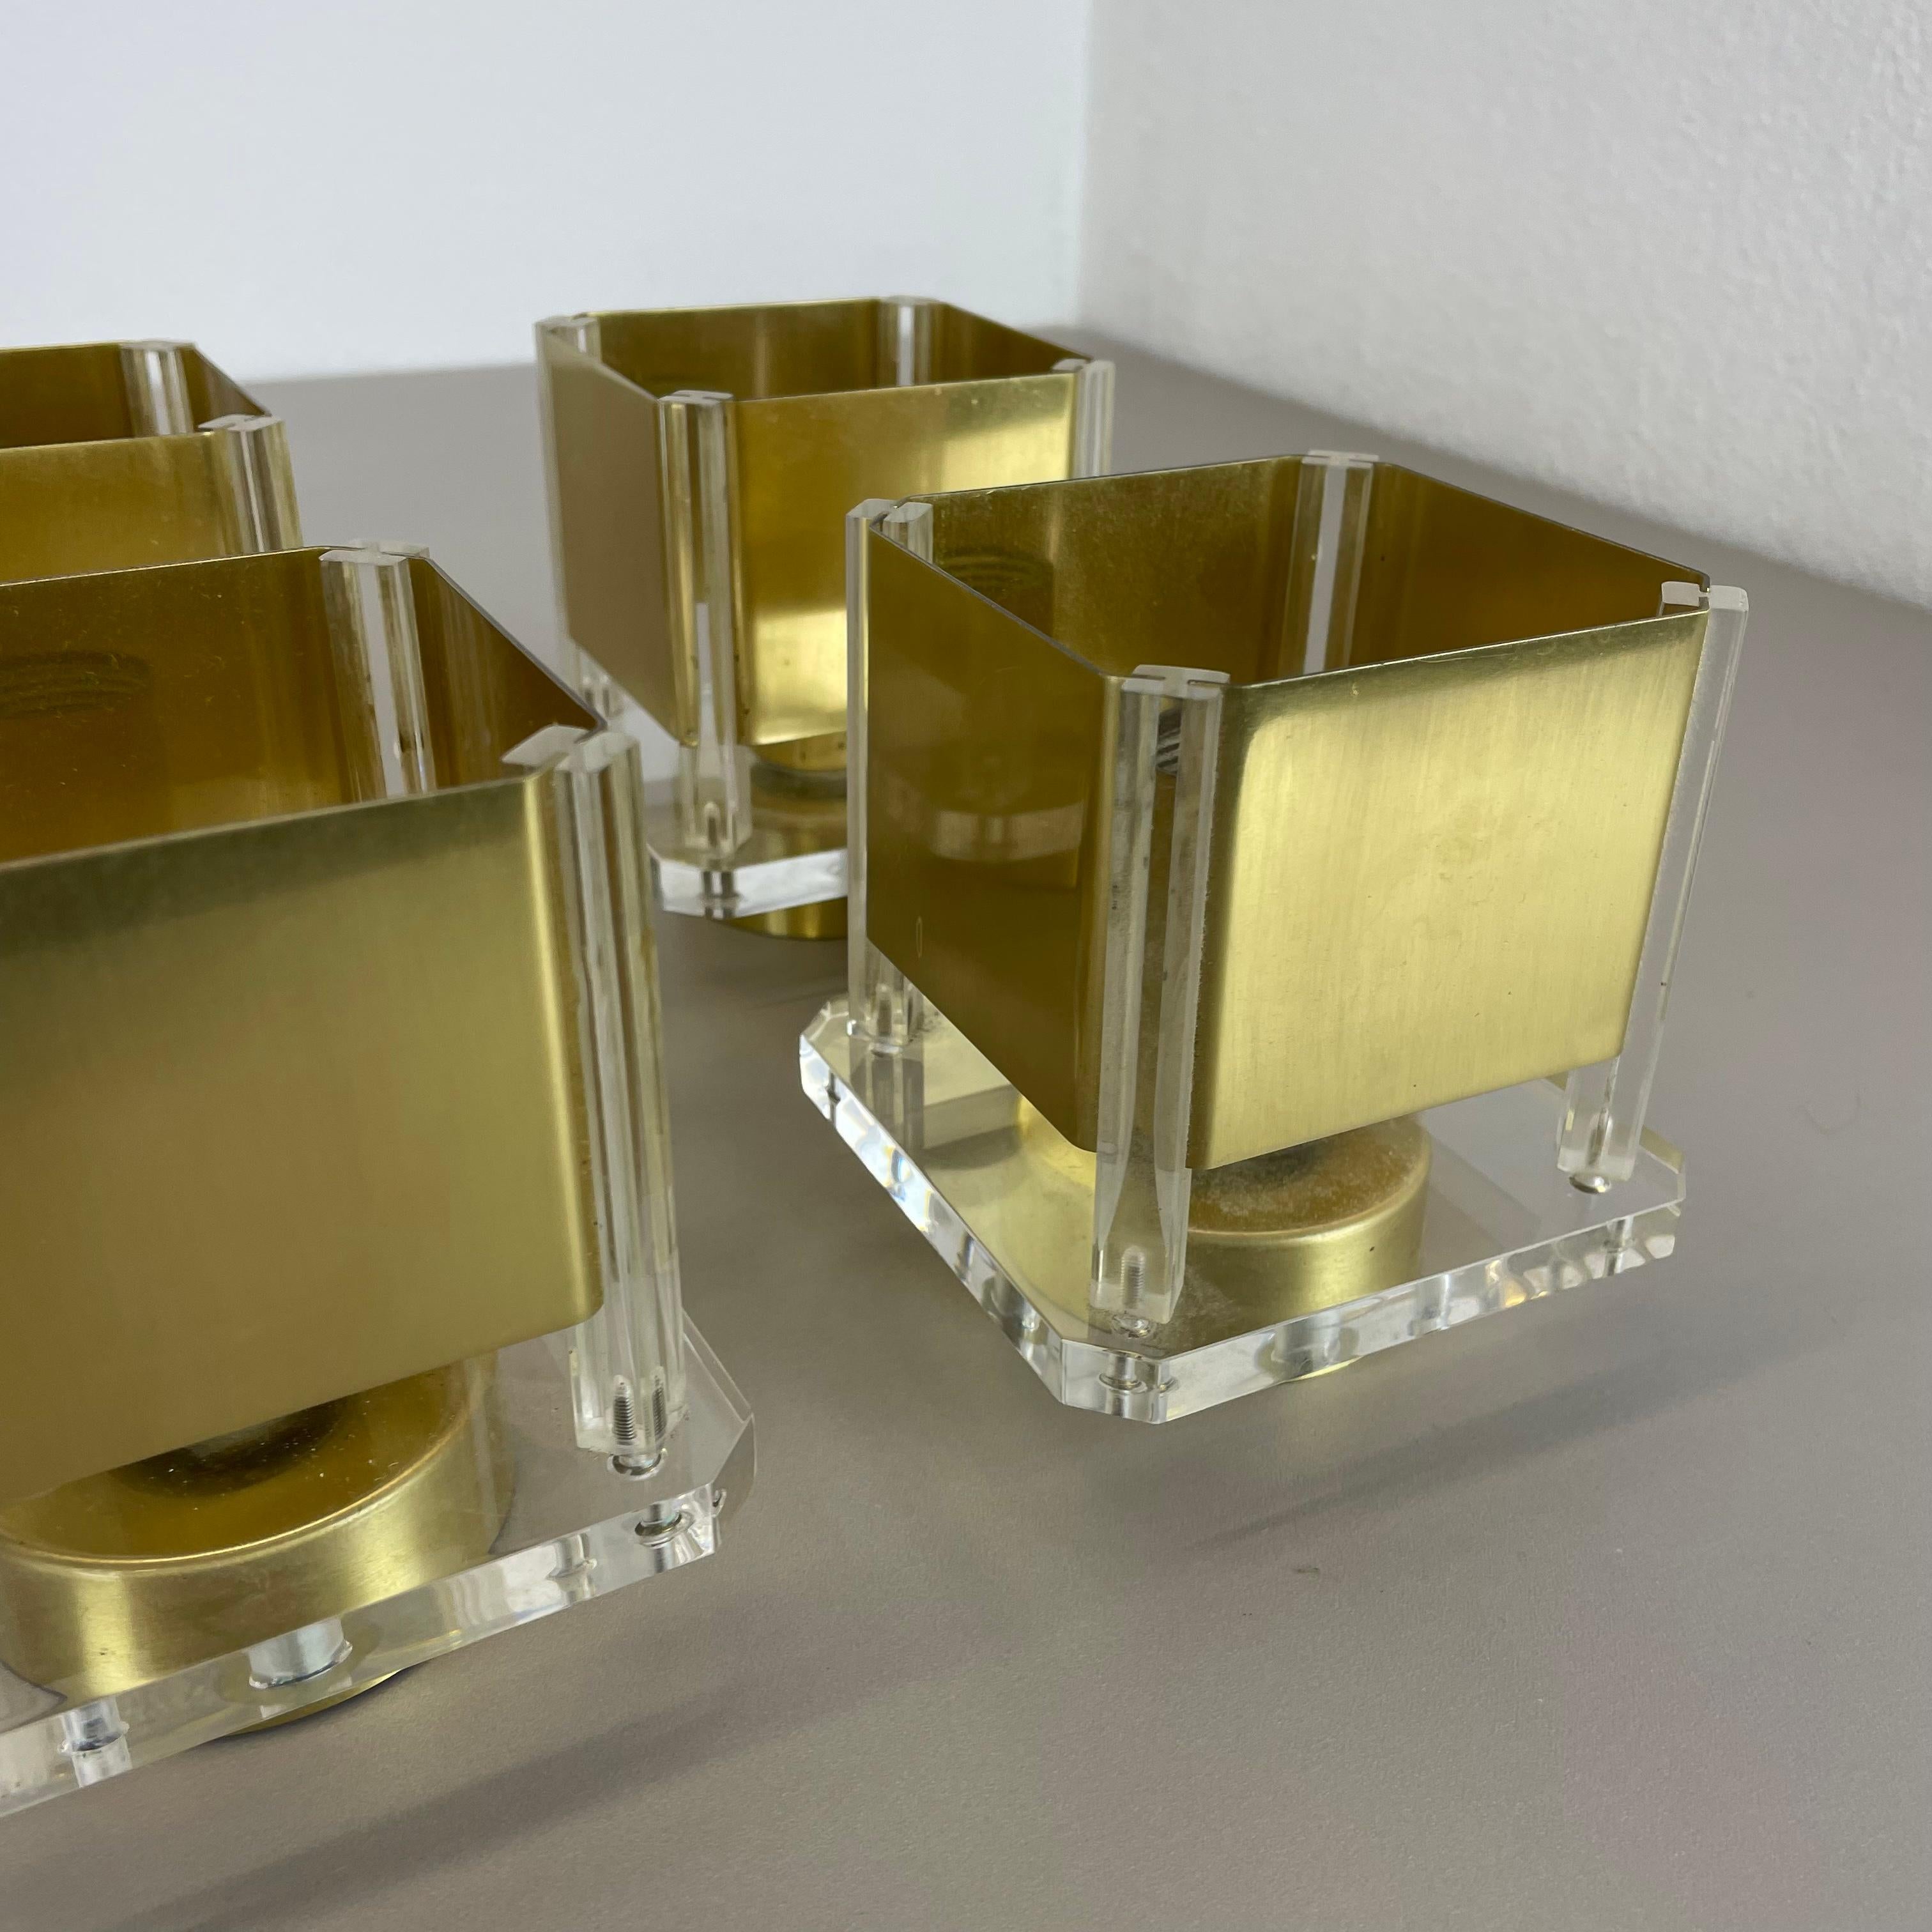 Set of 2 Brass + Acryl Glass Cubic Stilnovo Style Wall Light Sconces, Italy 1970 For Sale 13